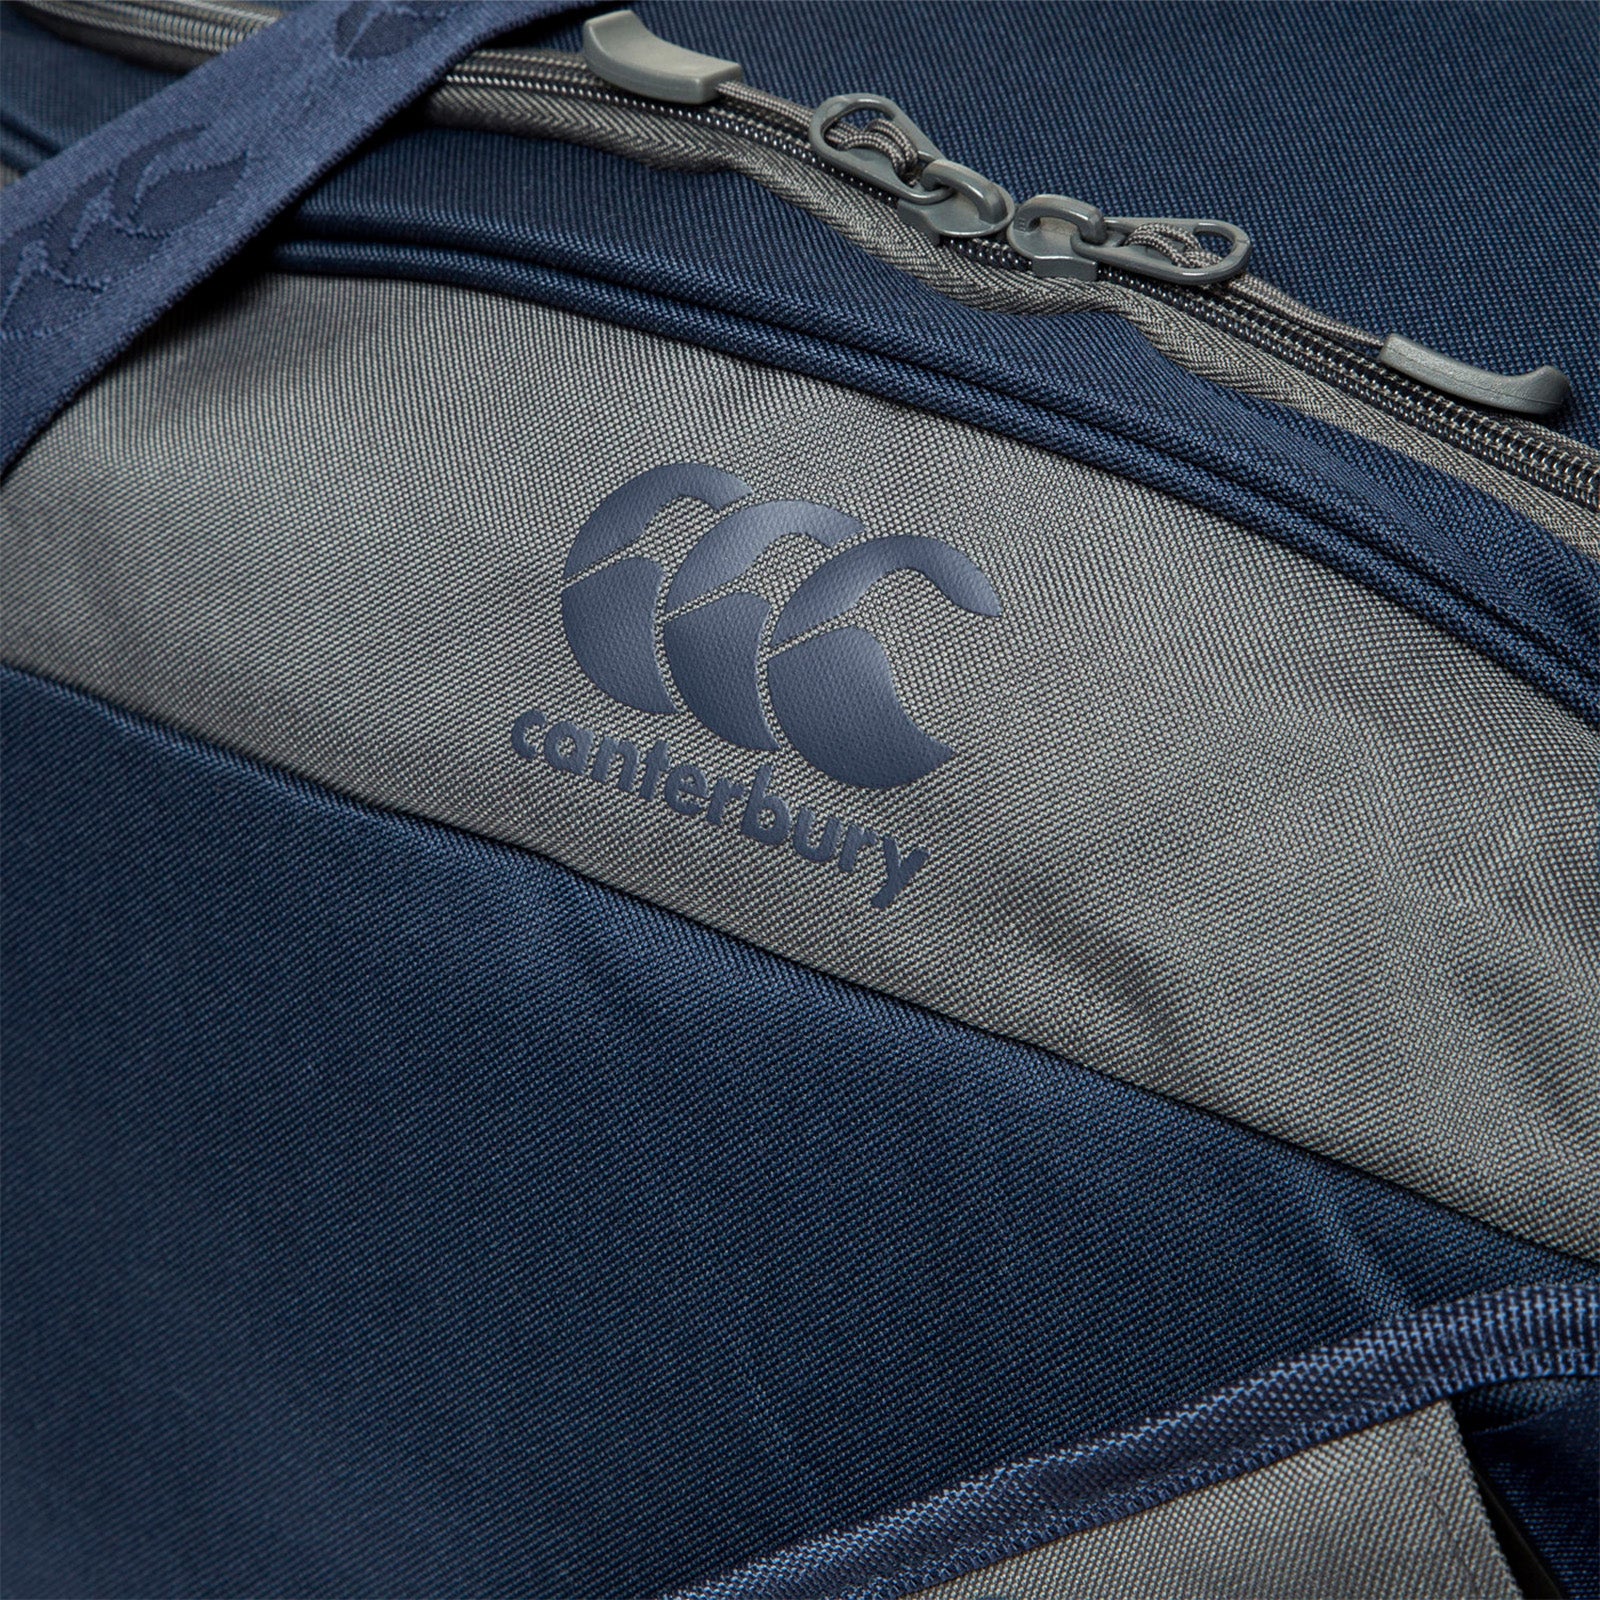 Photo of Canterbury Classic Holdall in Navy, close up of Canterbury logo & zip detail